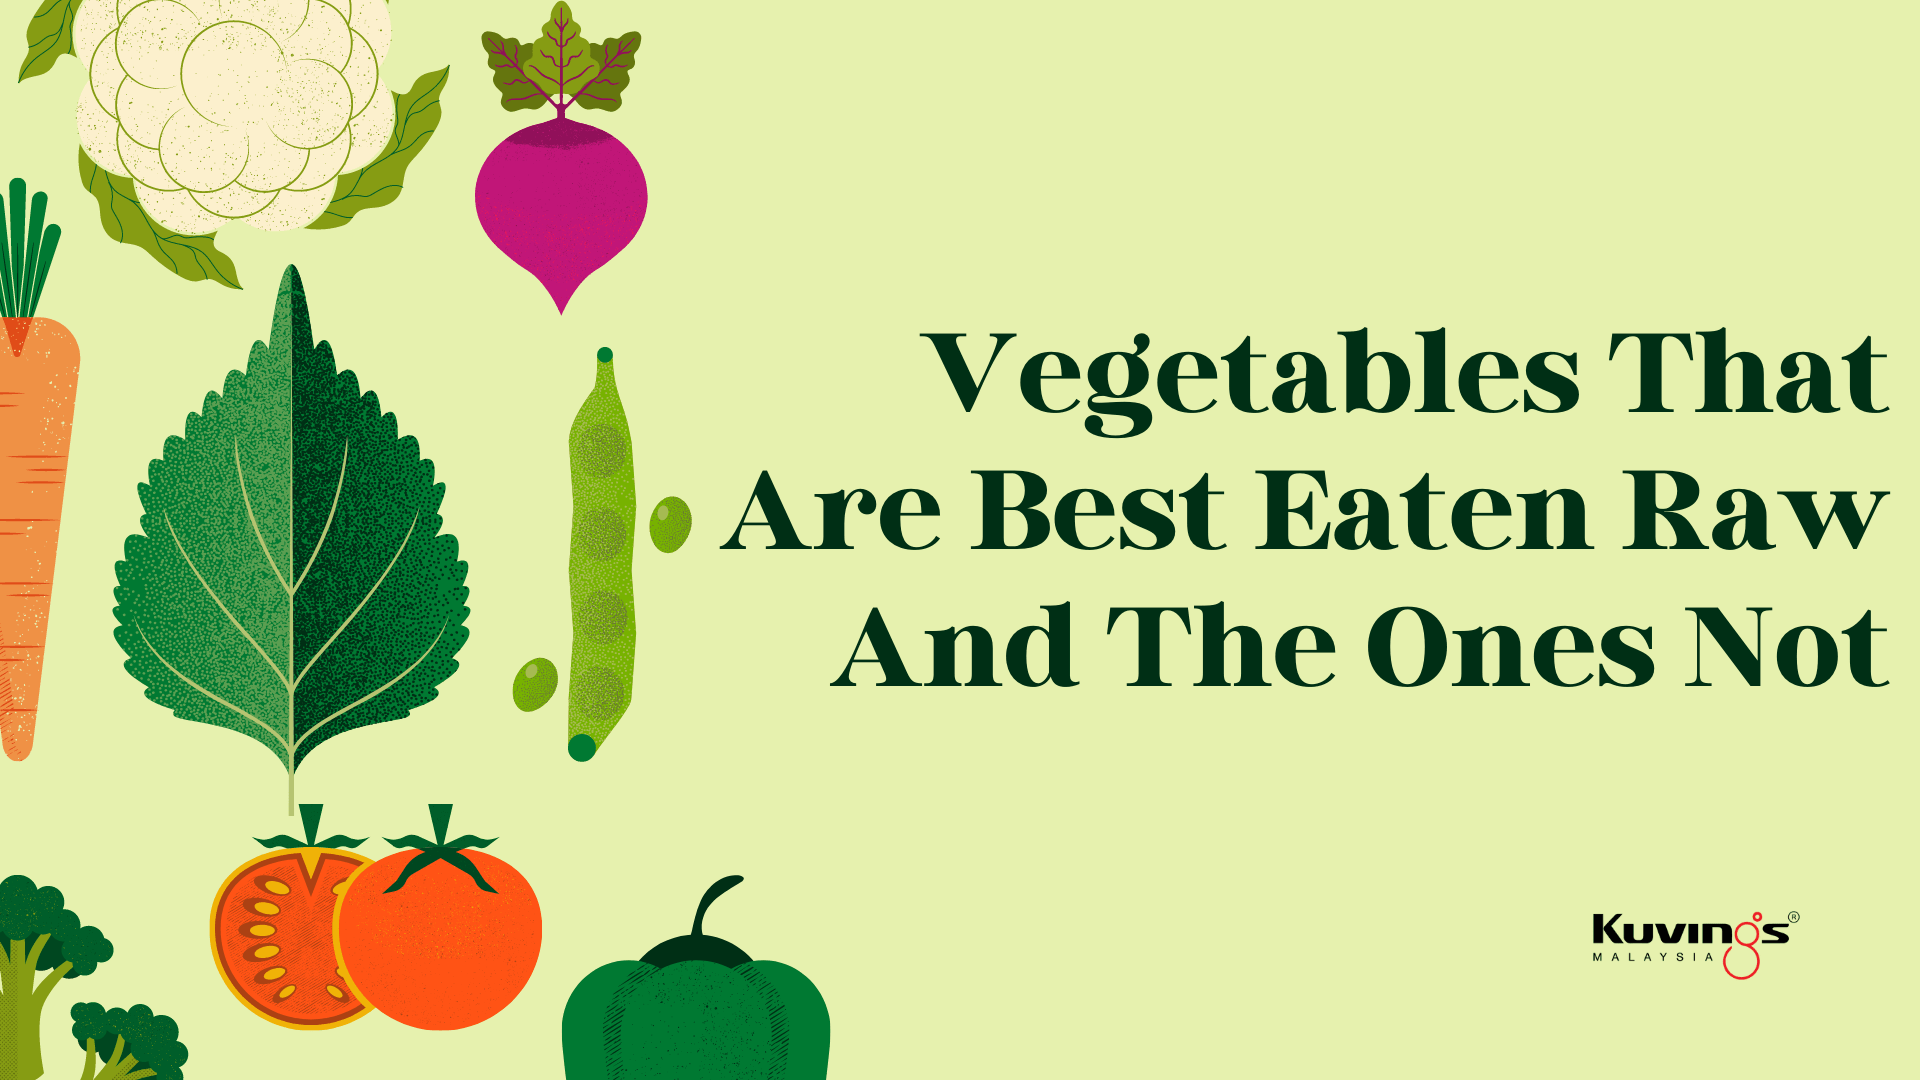 Vegetables That Are Best Eaten Raw And The Ones Not - Kuvings.my